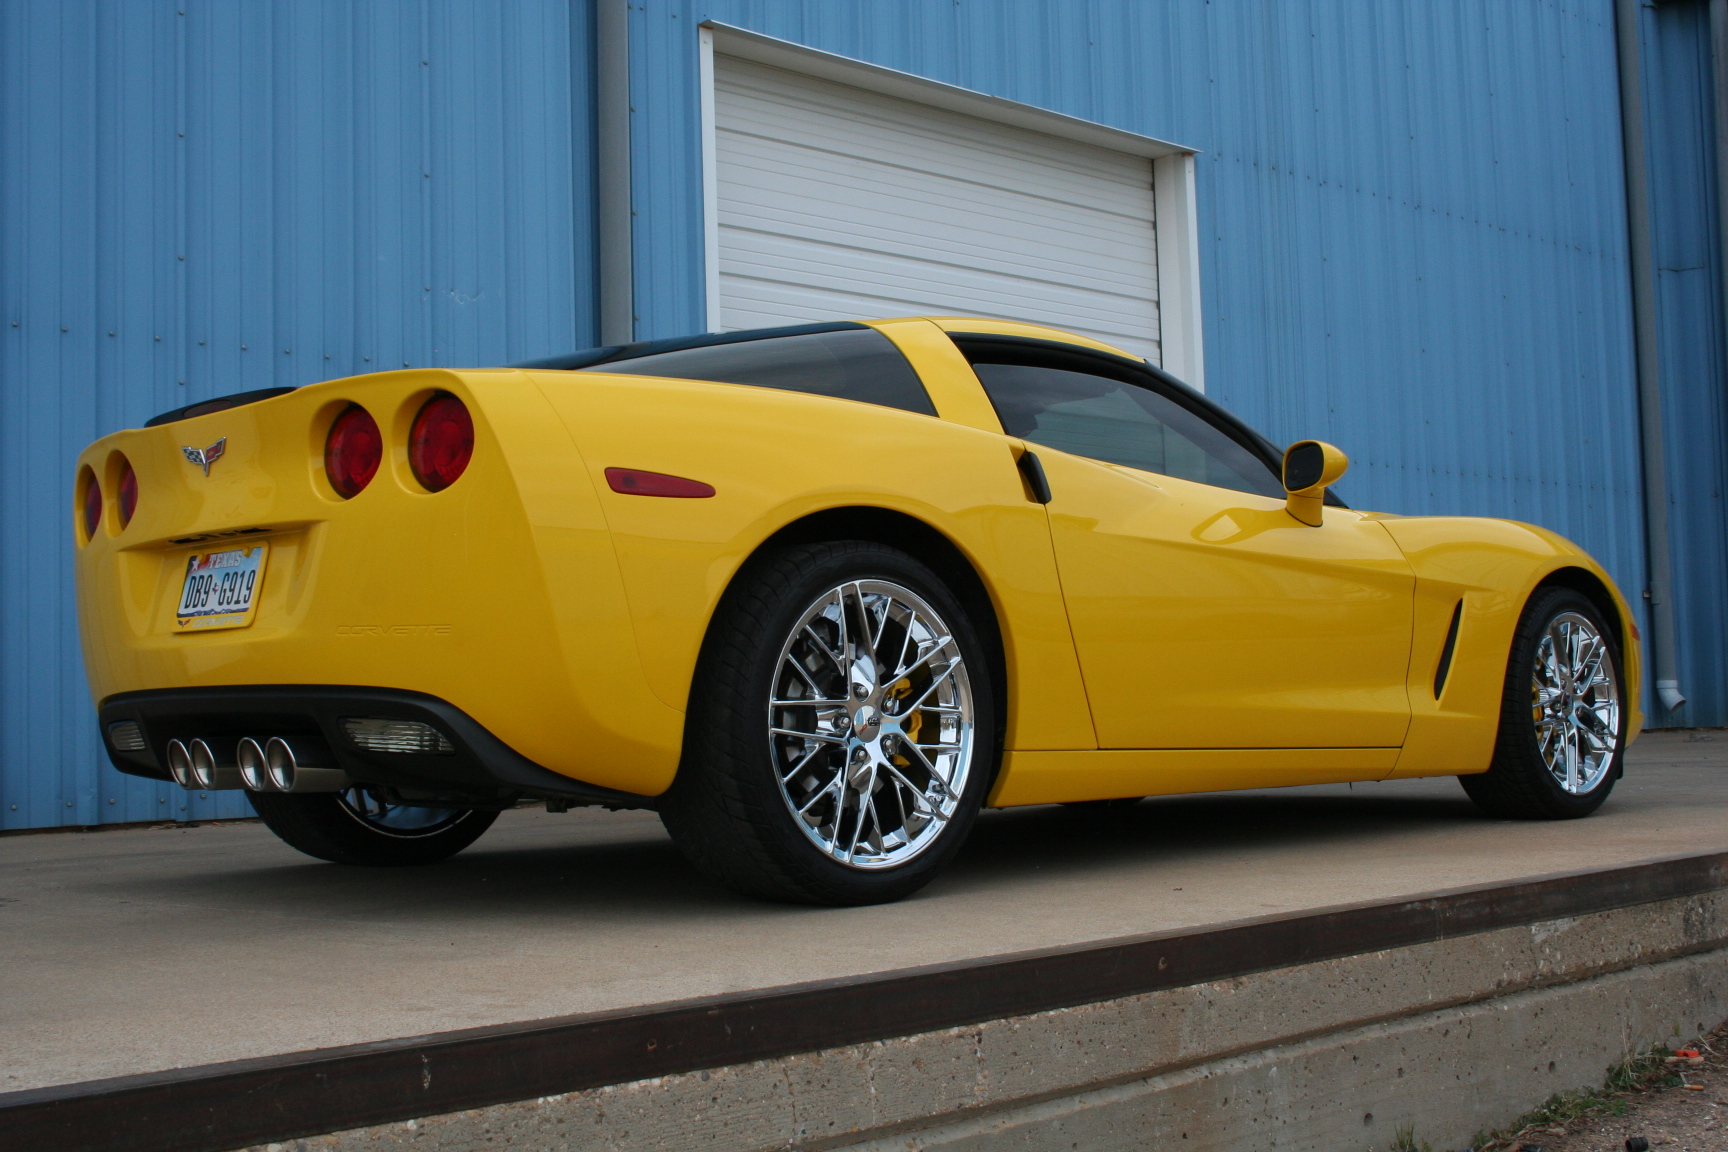 ZR1 Style Wheels in Chrome on Yellow Corvette.